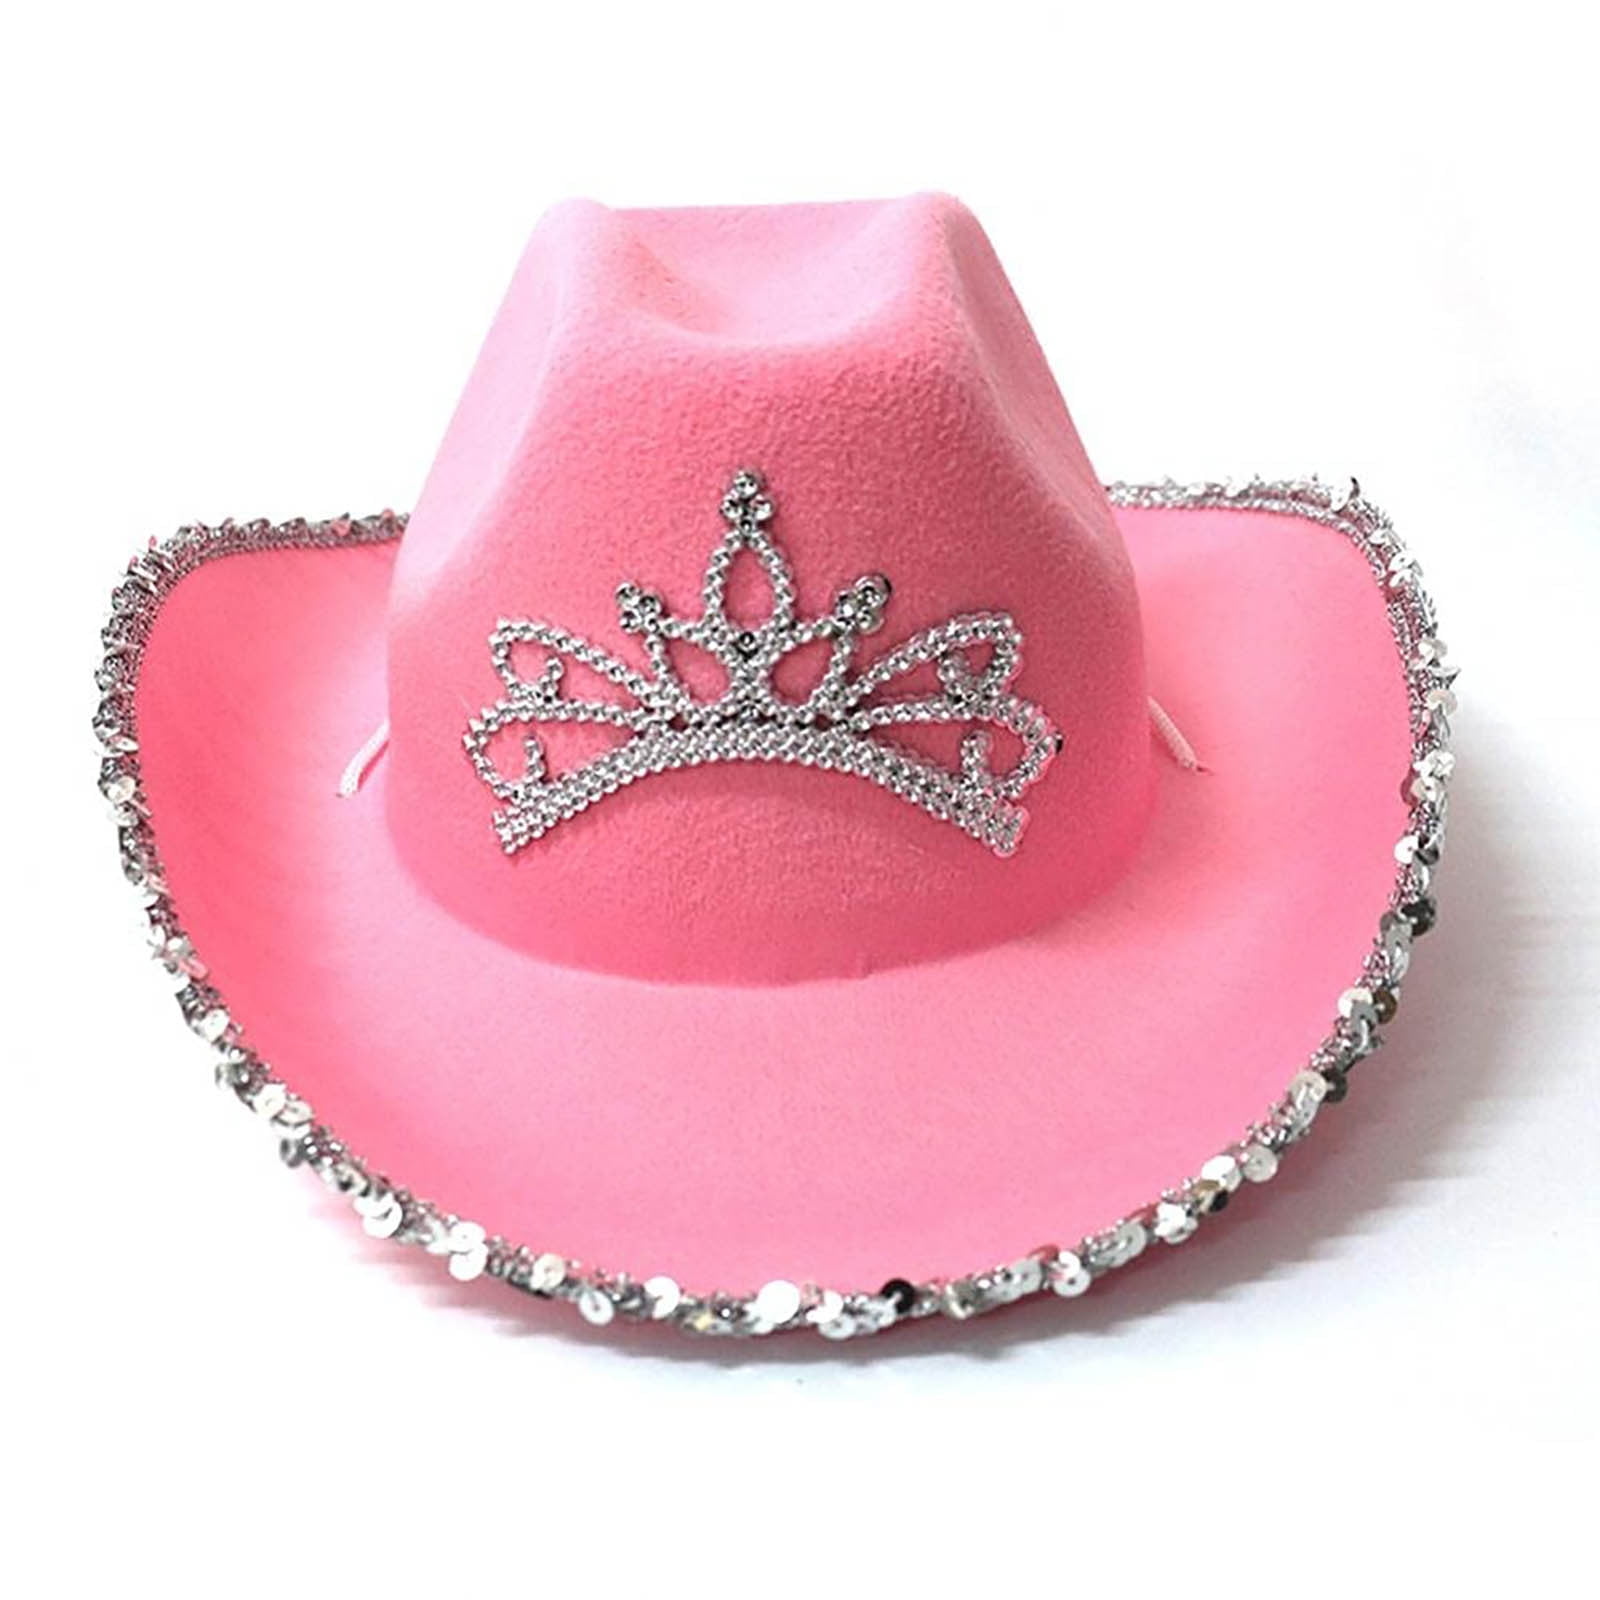 Western Style Cowboy Hat Blinking Crown Cowgirl Hat Cowboy Cap Holiday Costume Party Hat Pink 